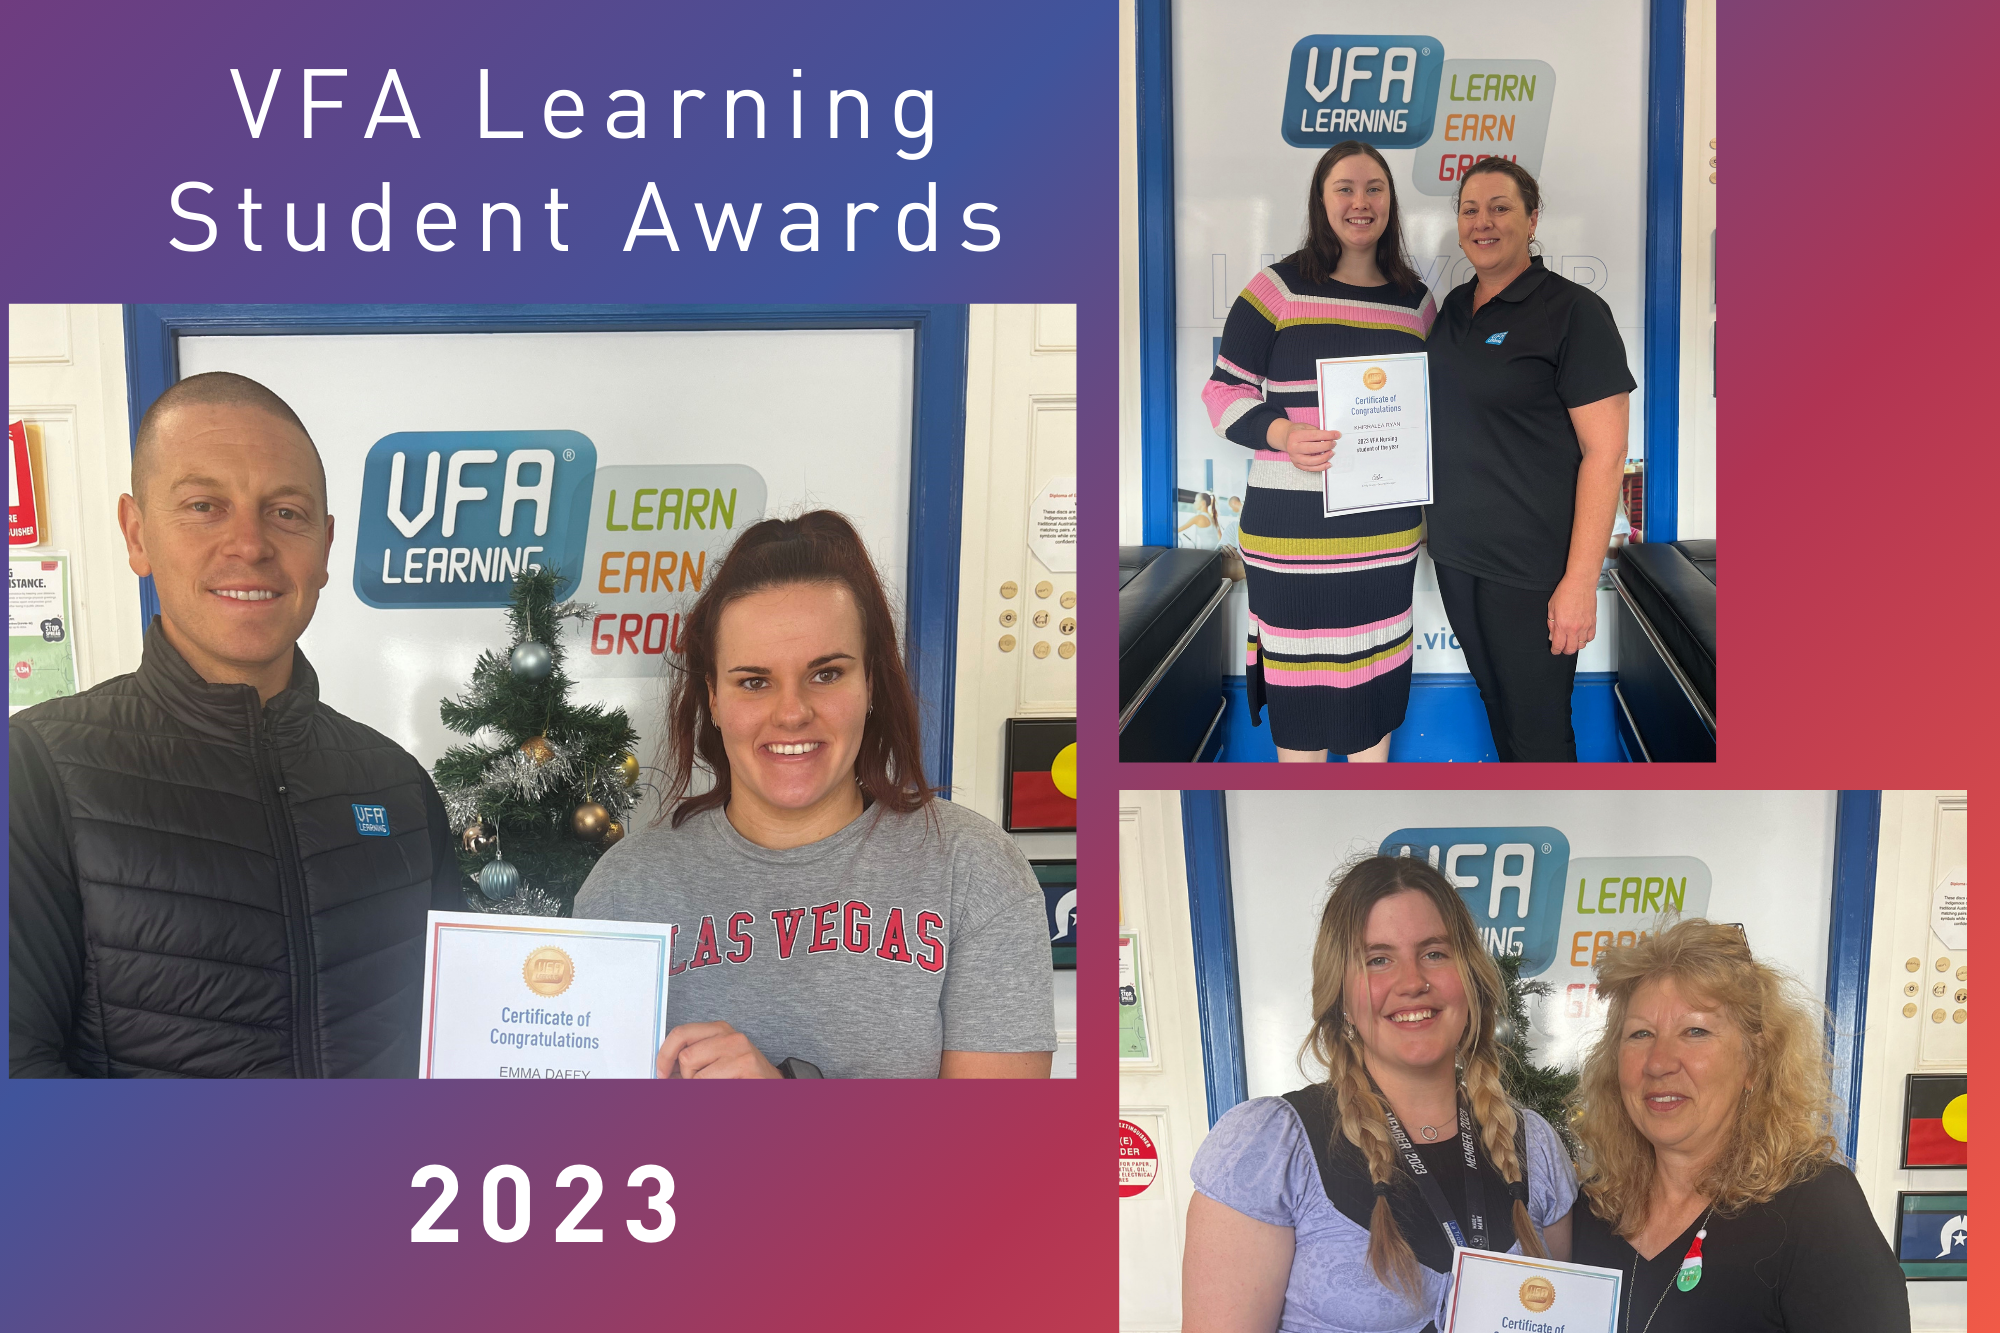 VFA Learning Student Awards 2023